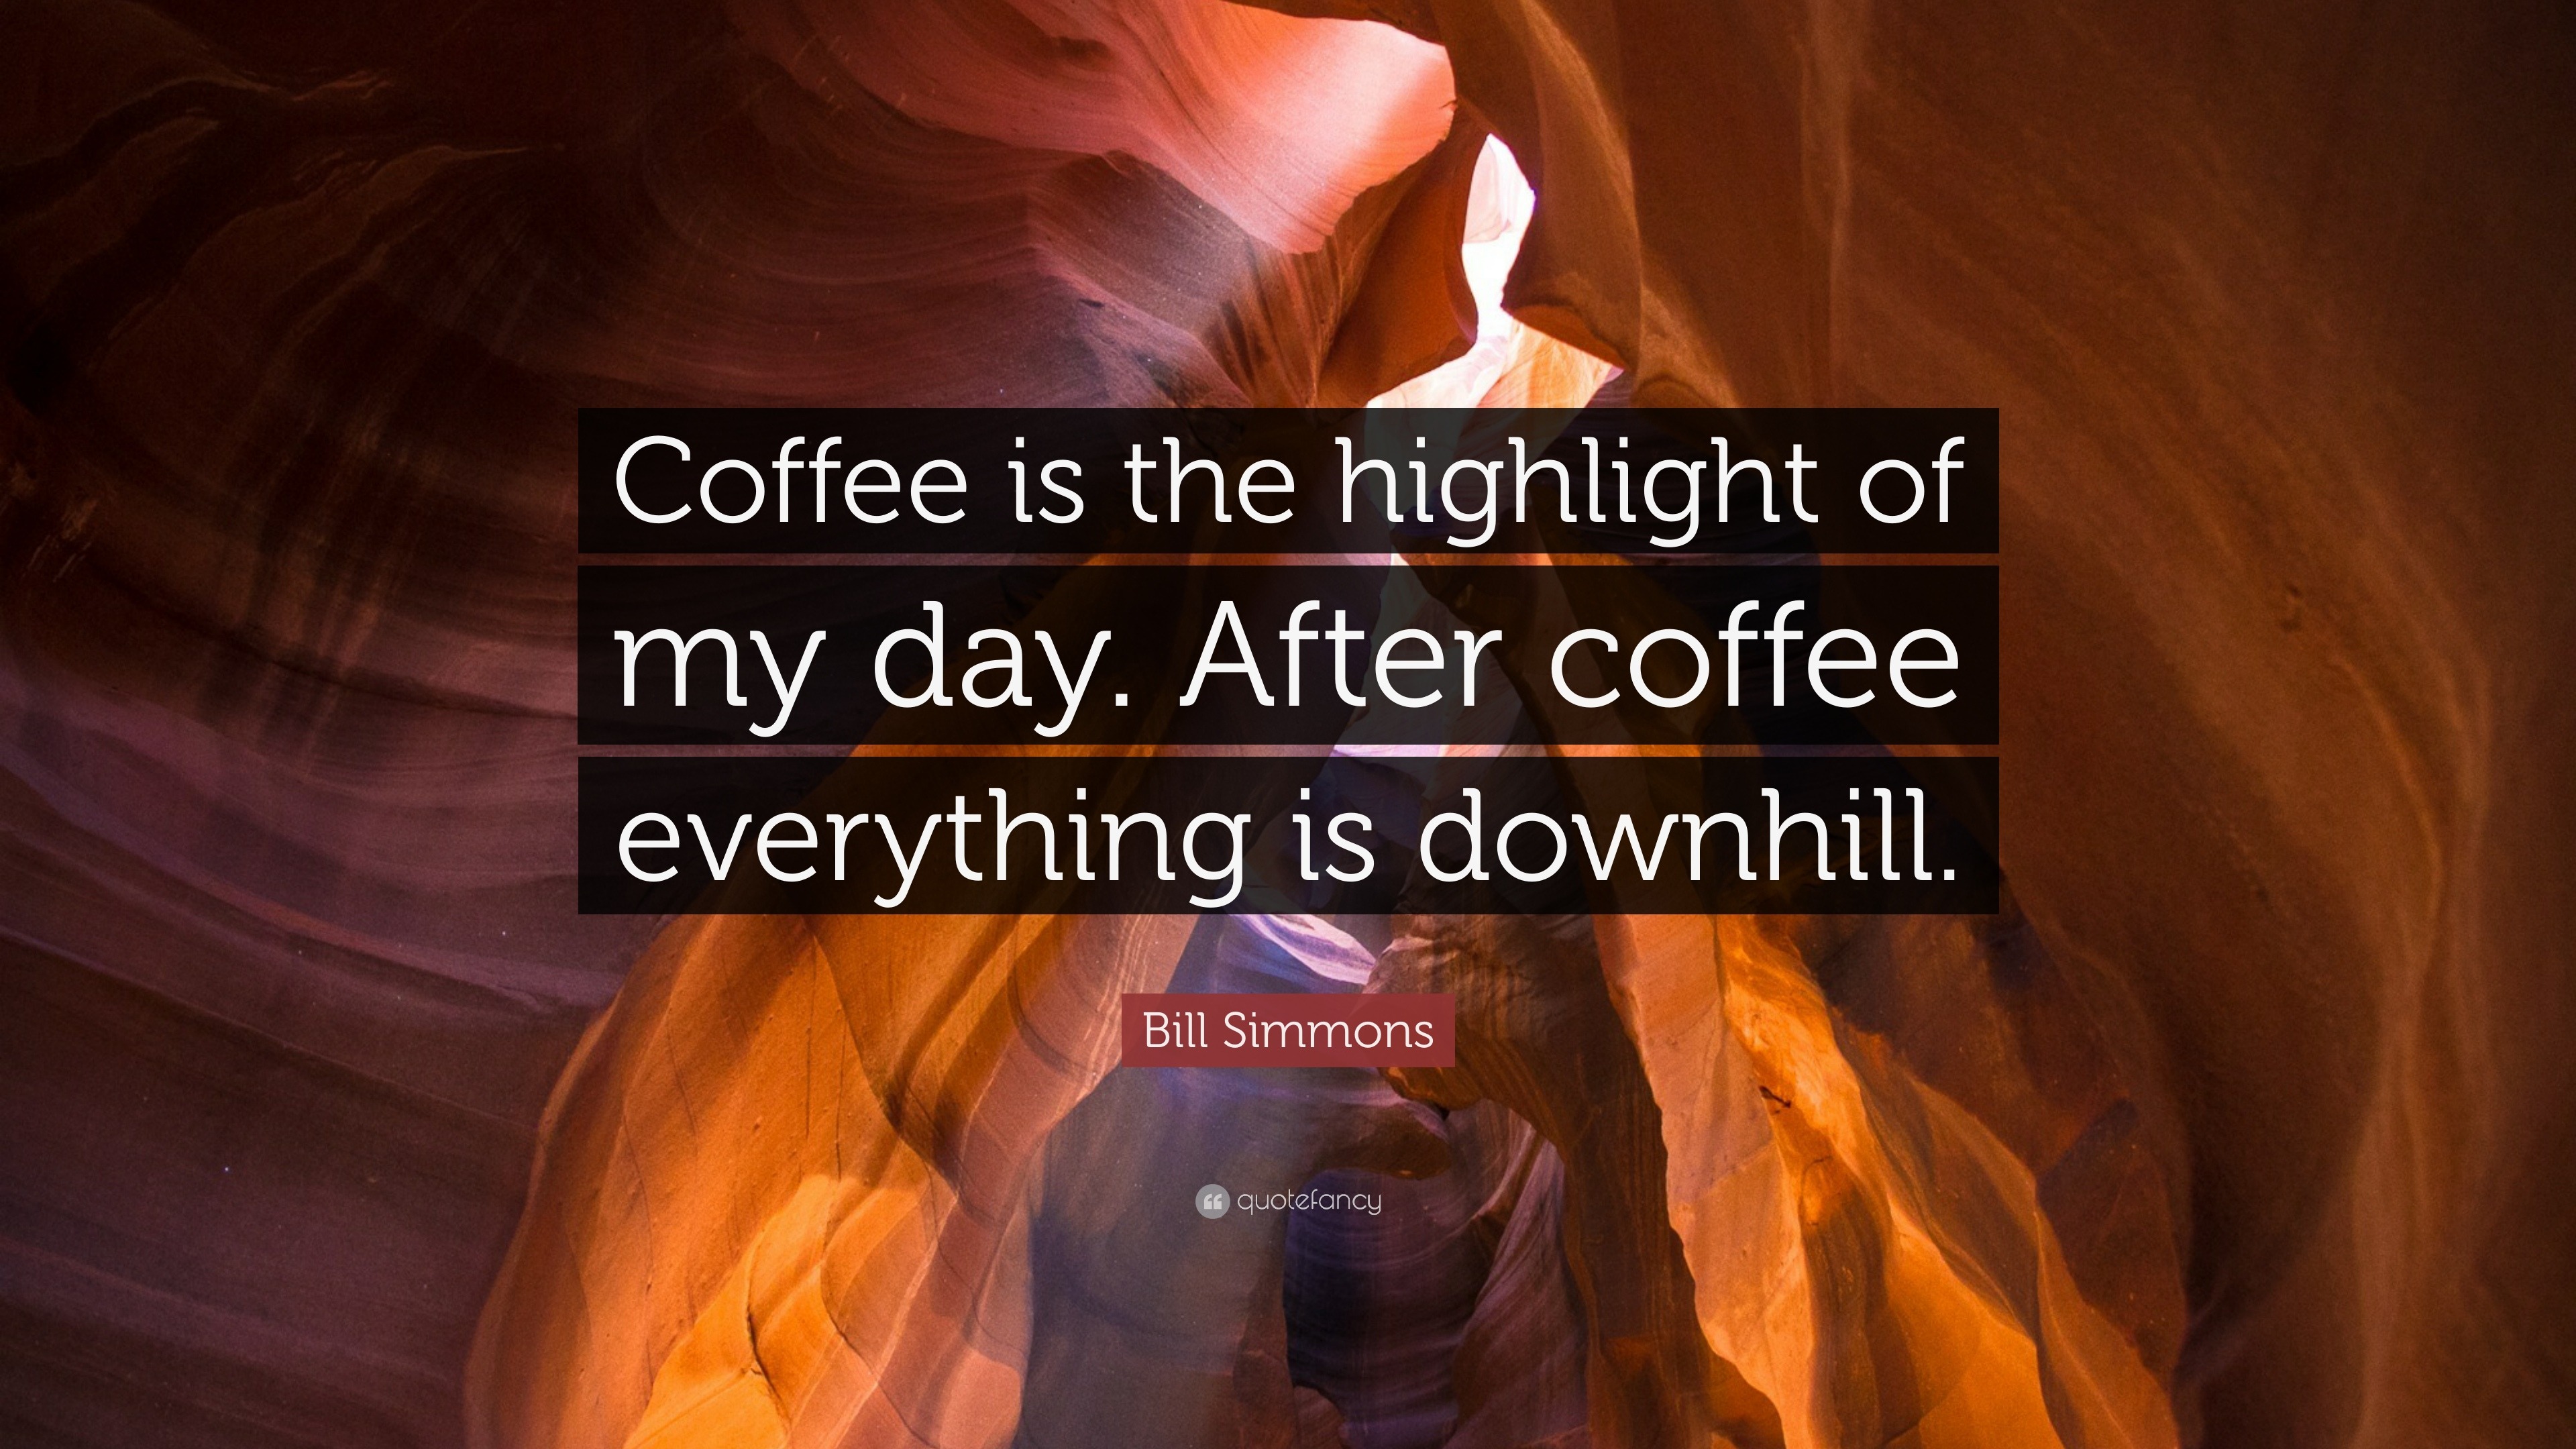 Bill Simmons Quote: “Coffee Is The Highlight Of My Day. After Coffee Everything Is Downhill.”